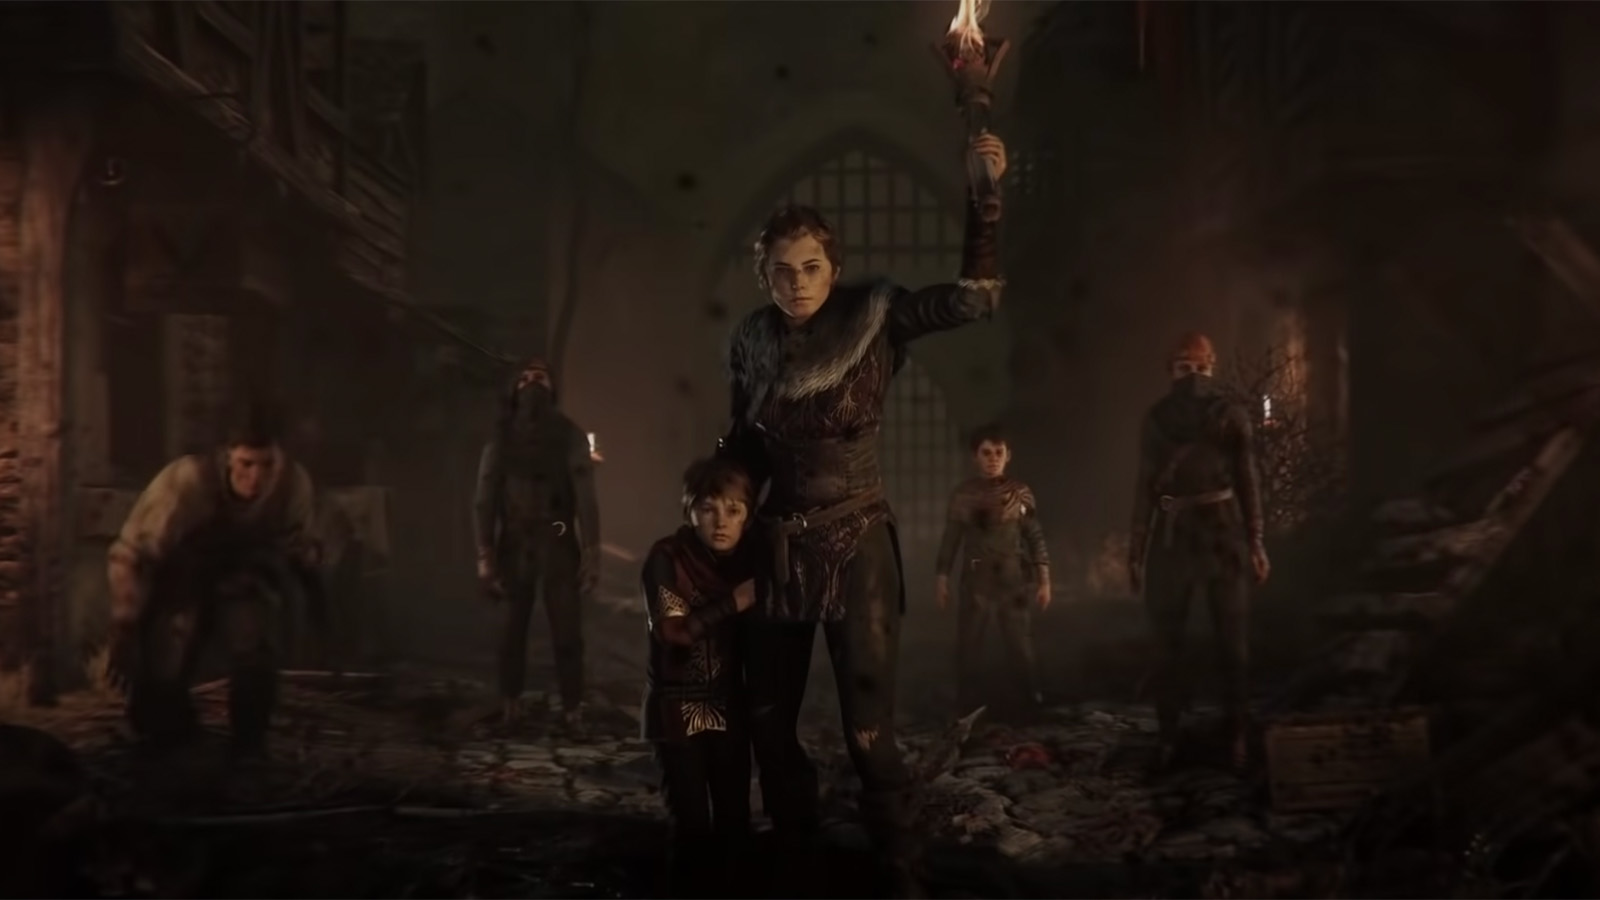 Guide for A Plague Tale: Innocence - Chapter 11 - Alive